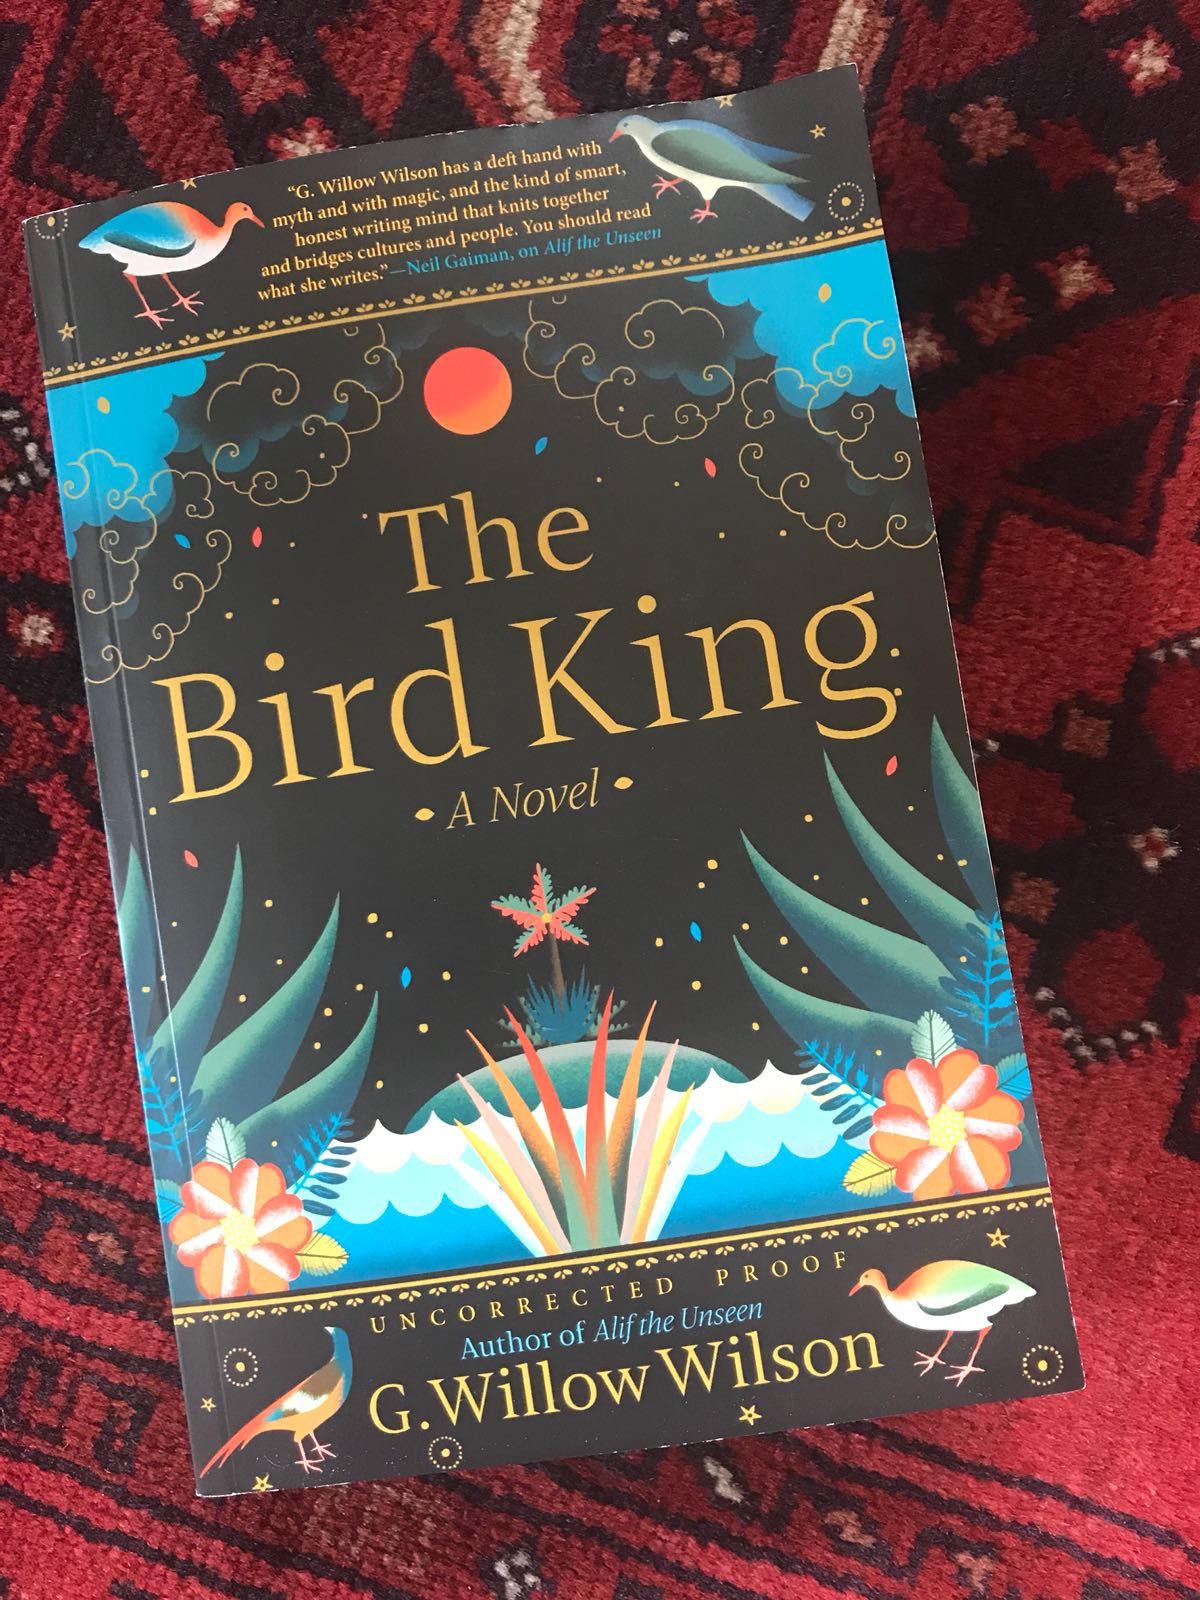 The Bird King by G. Willow Wilson – pre-order now